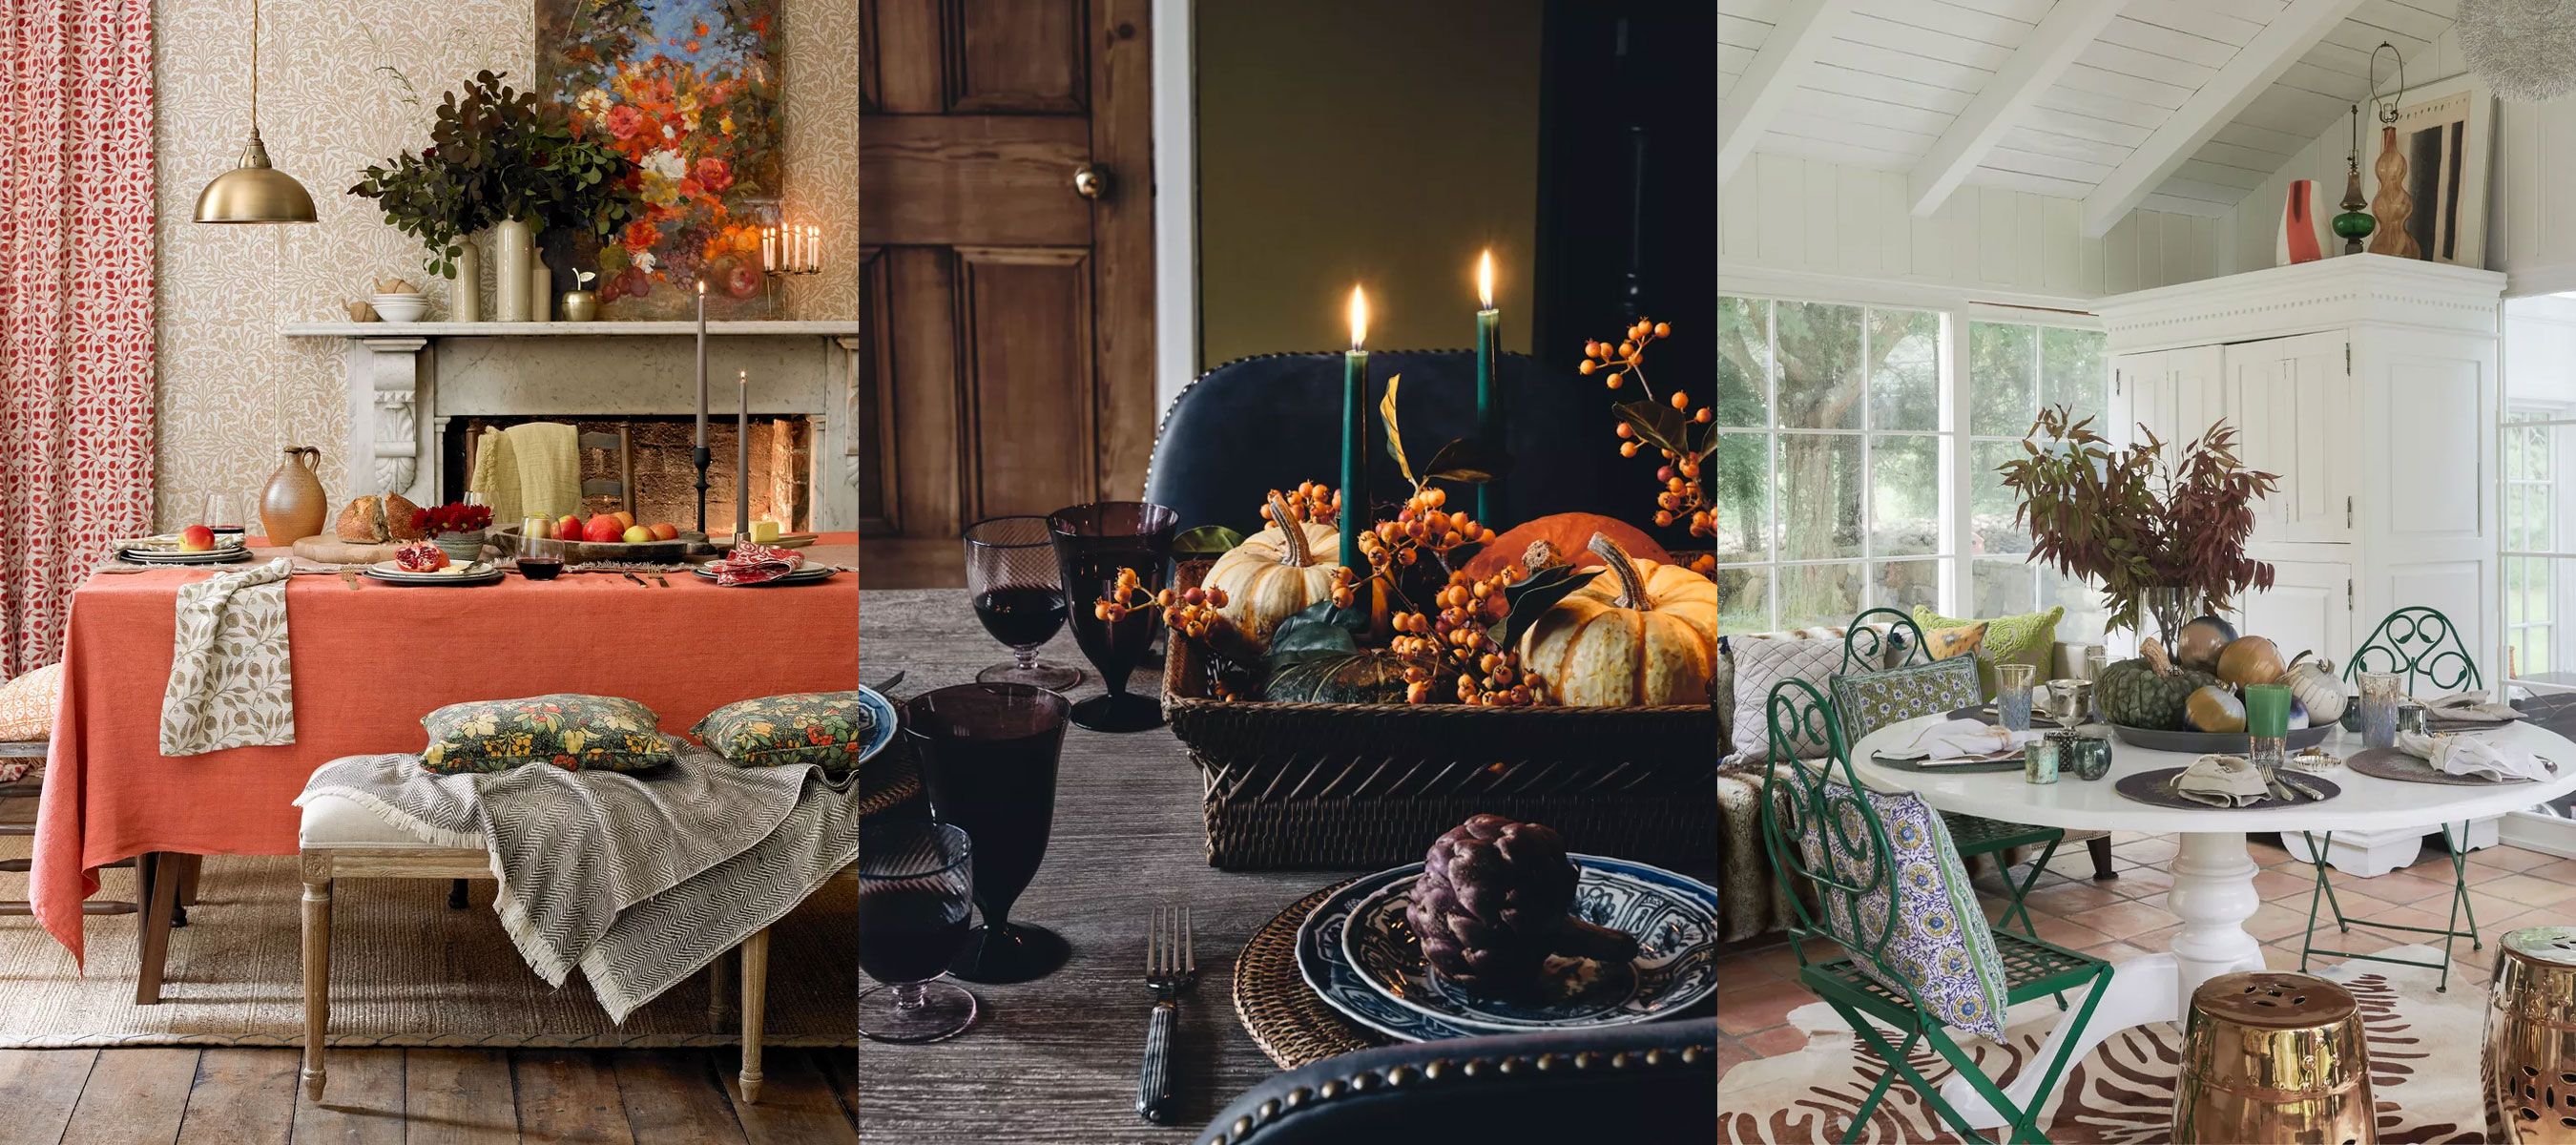 How To Set a Thanksgiving Table in Warm Fall Colors - Sanctuary